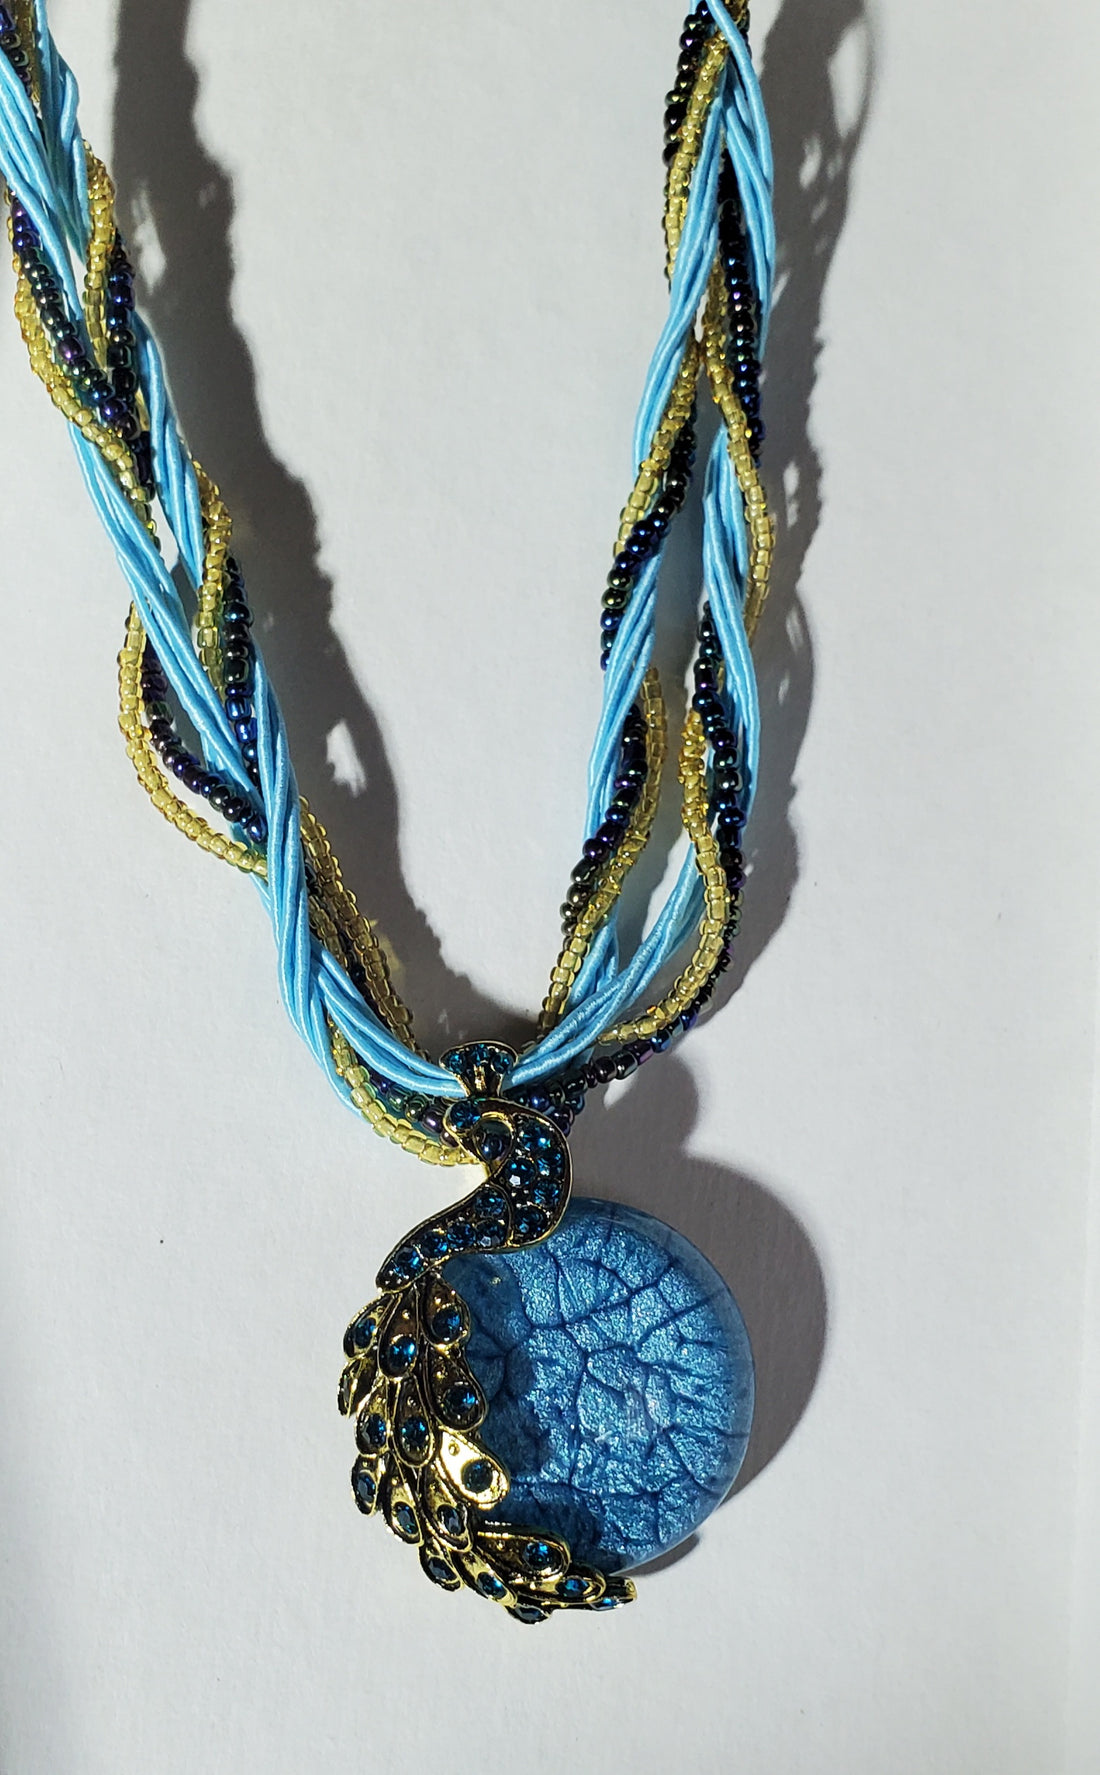 Blue Peacock Necklace - 18" w/Braided Silk Cord, Rhinestone, and Glass Cabachon